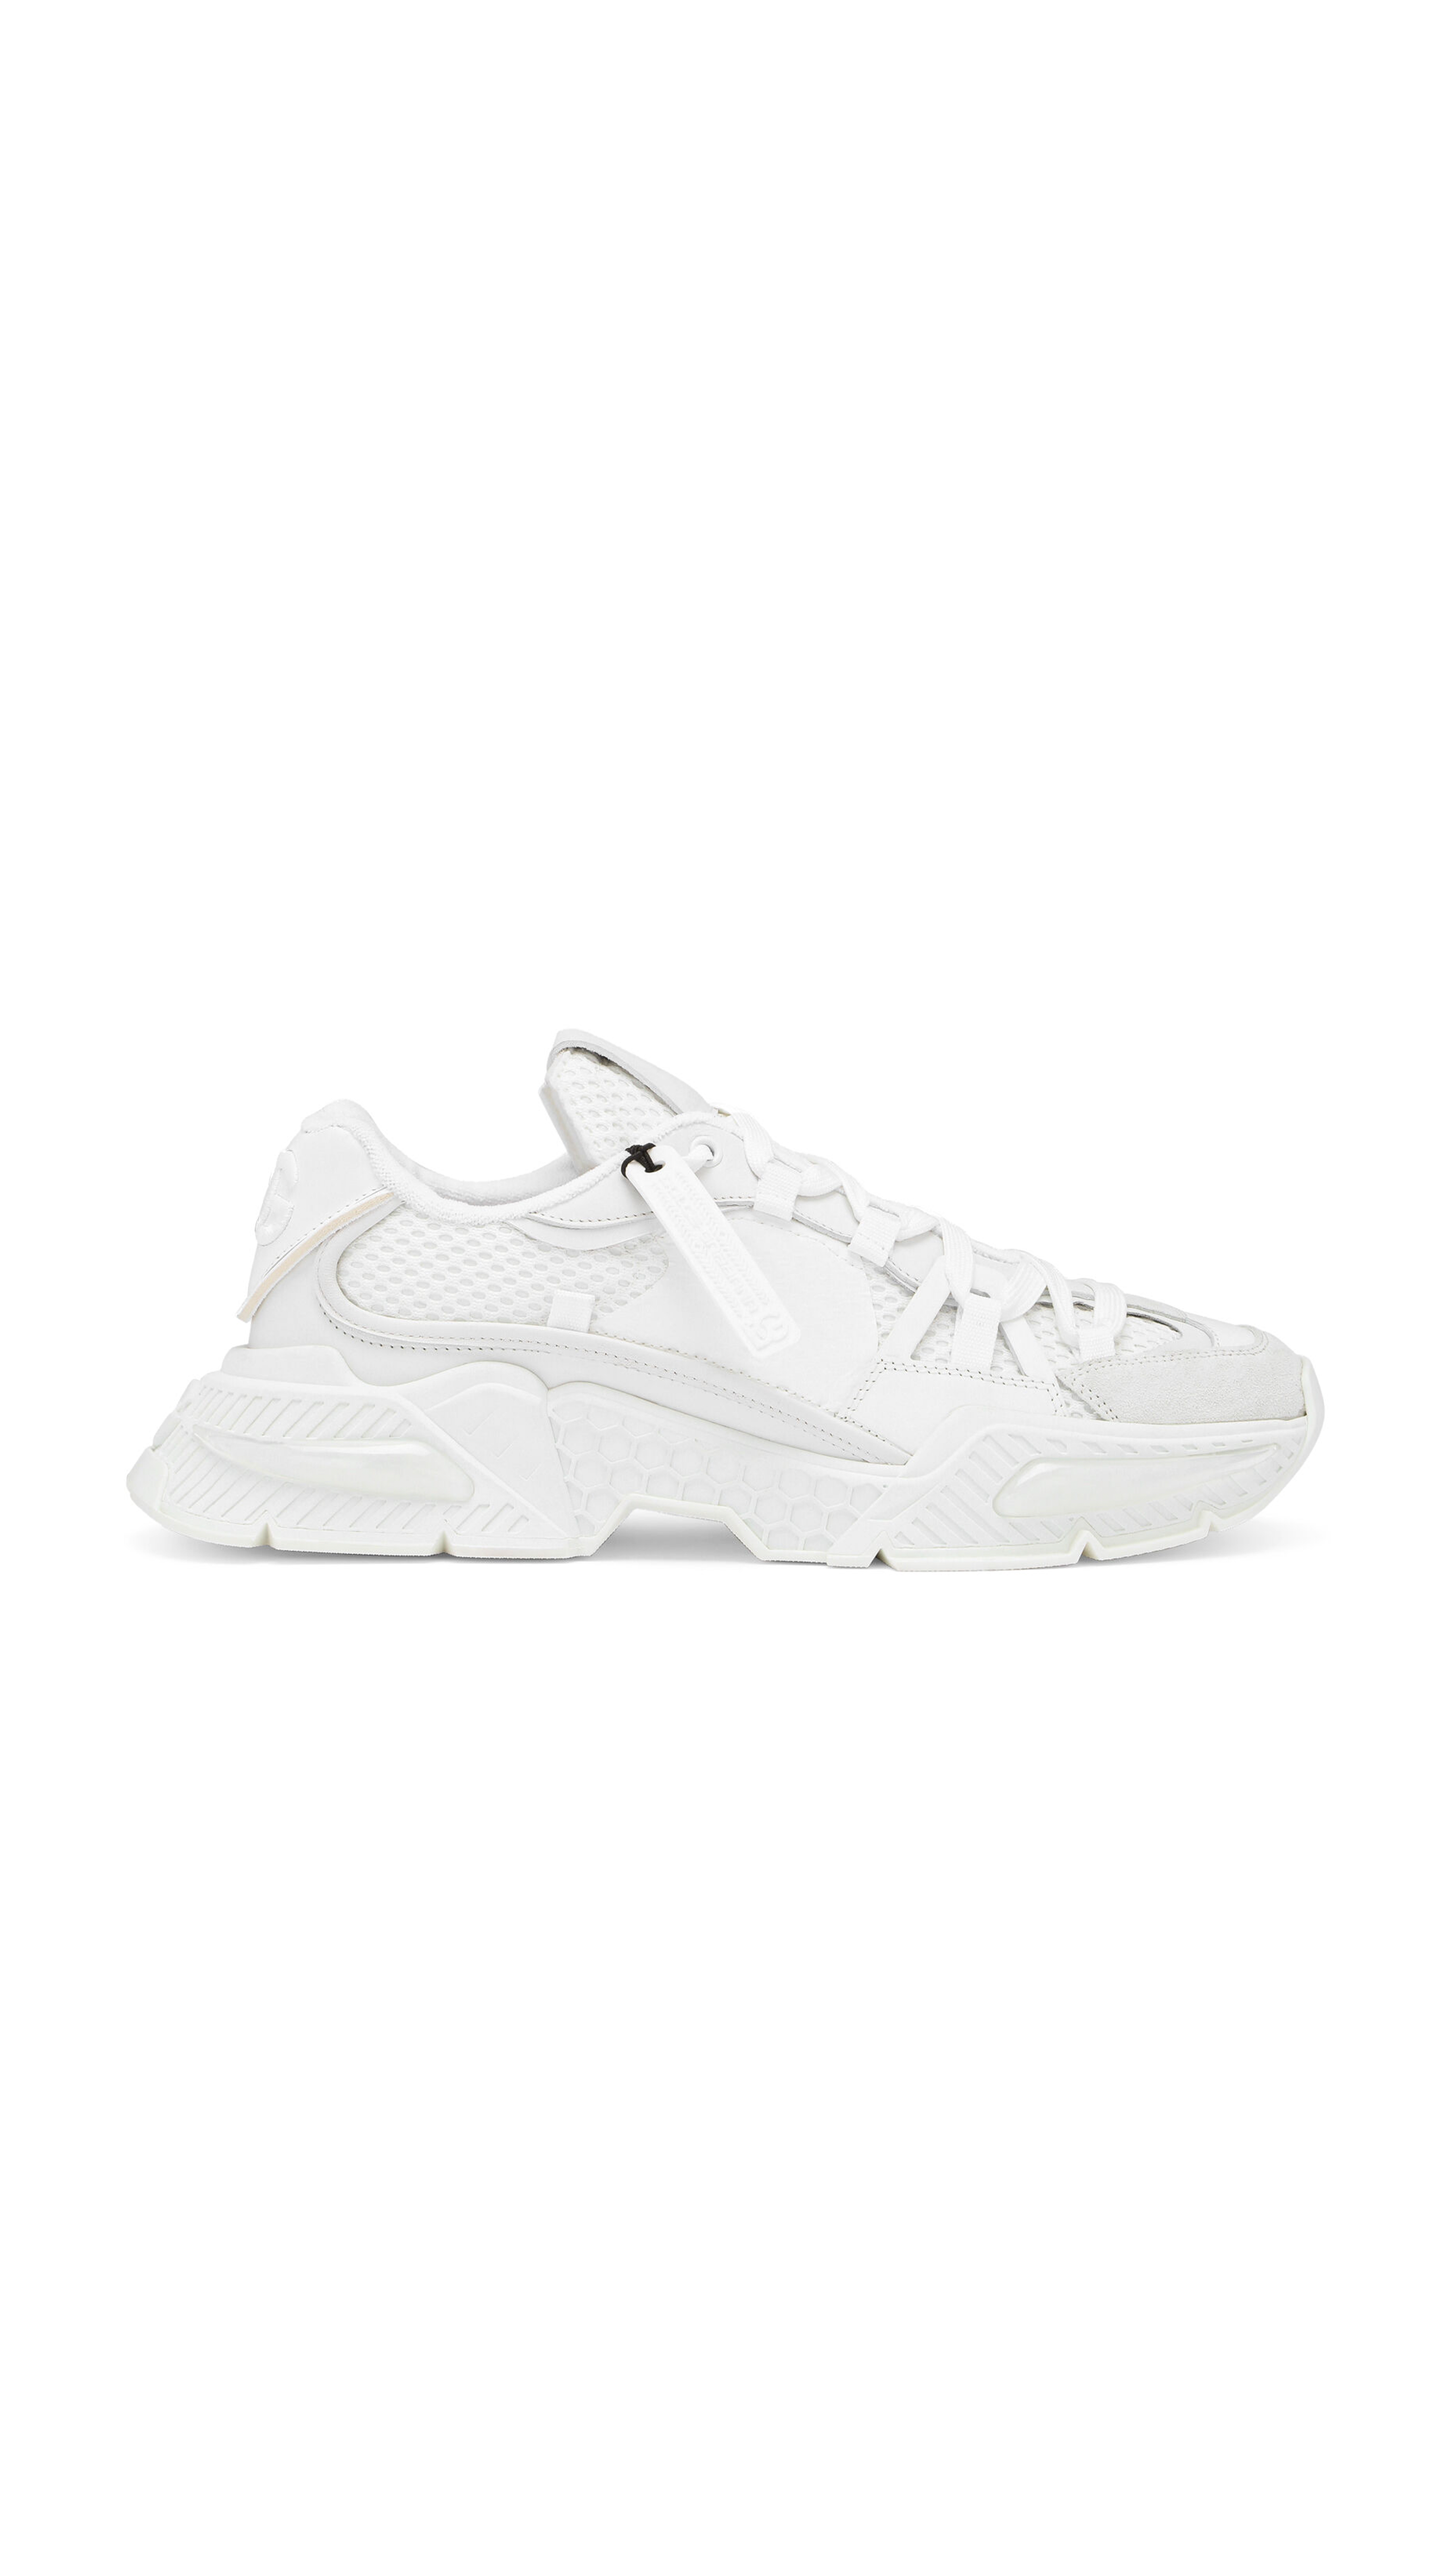 Mixed-Material Airmaster Sneaker - White